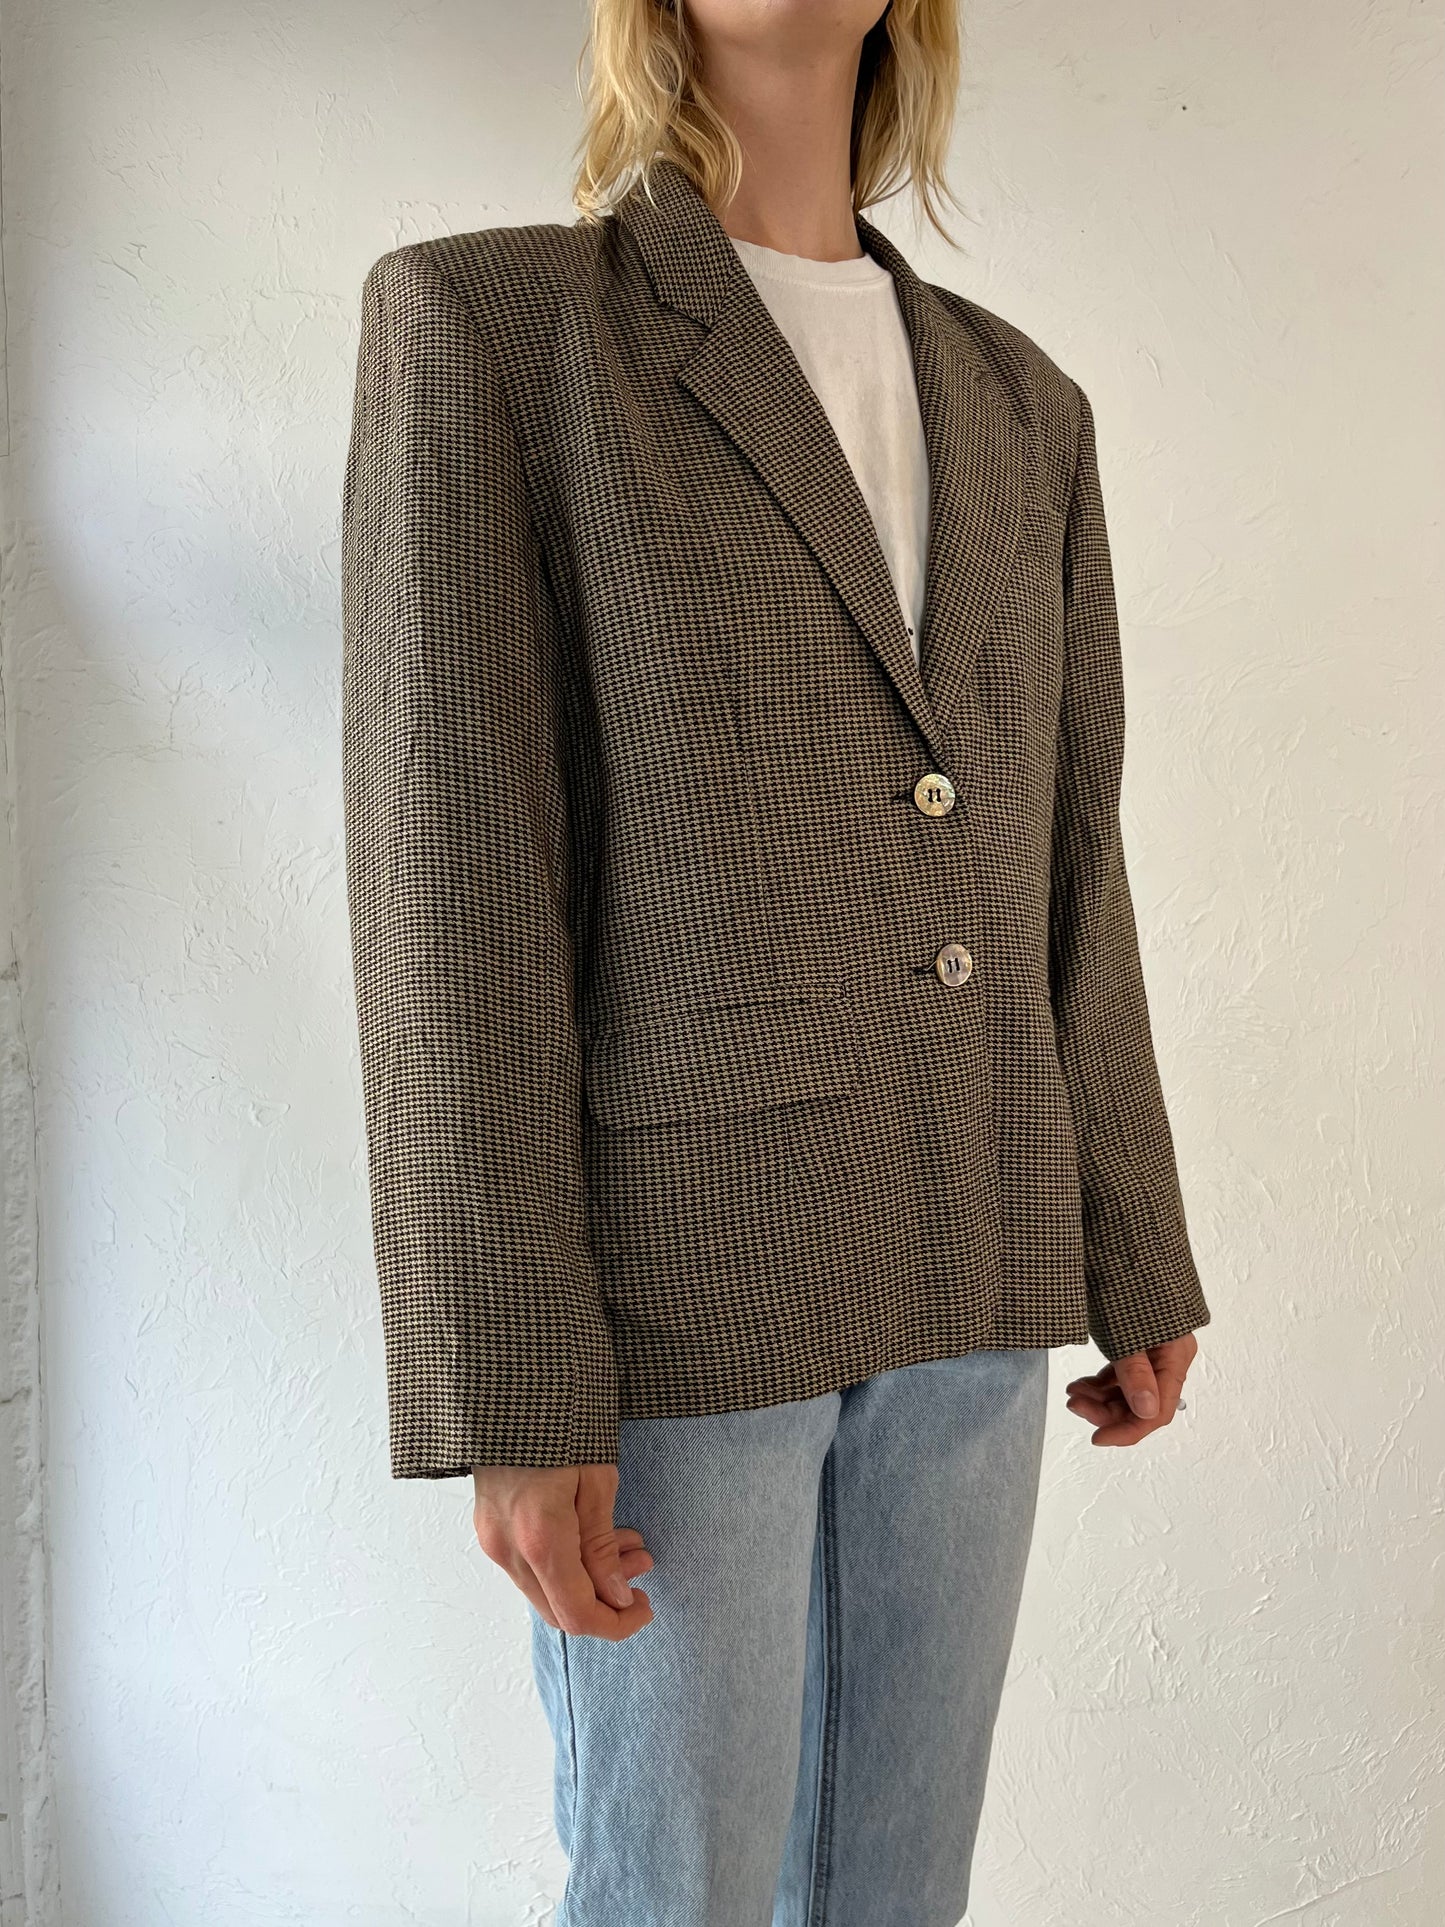 80s 'ABS' Houndstooth Rayon Blazer Jacket / Large